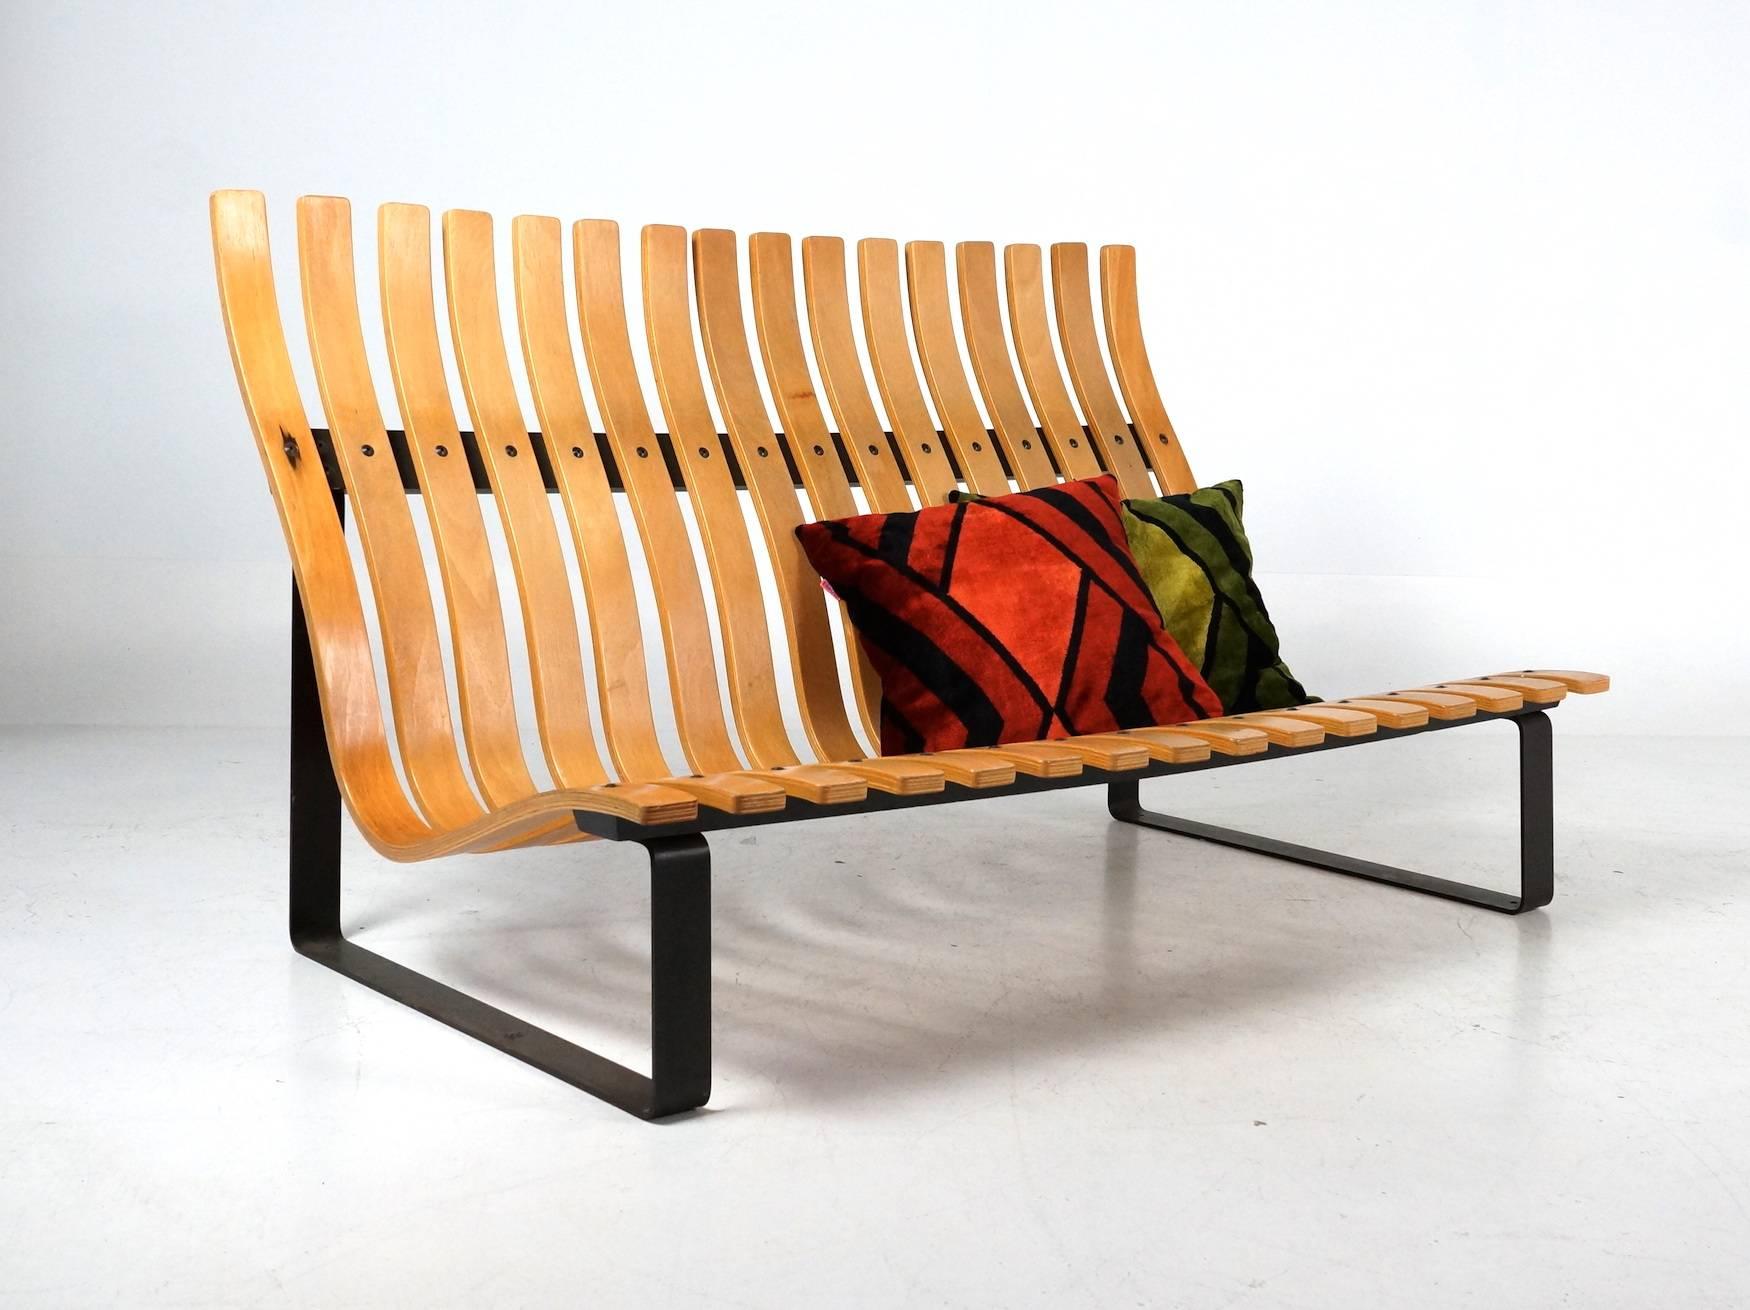 20th Century Bentwood Slatted Bench by Kho Liang Ie for Artifort, 1968